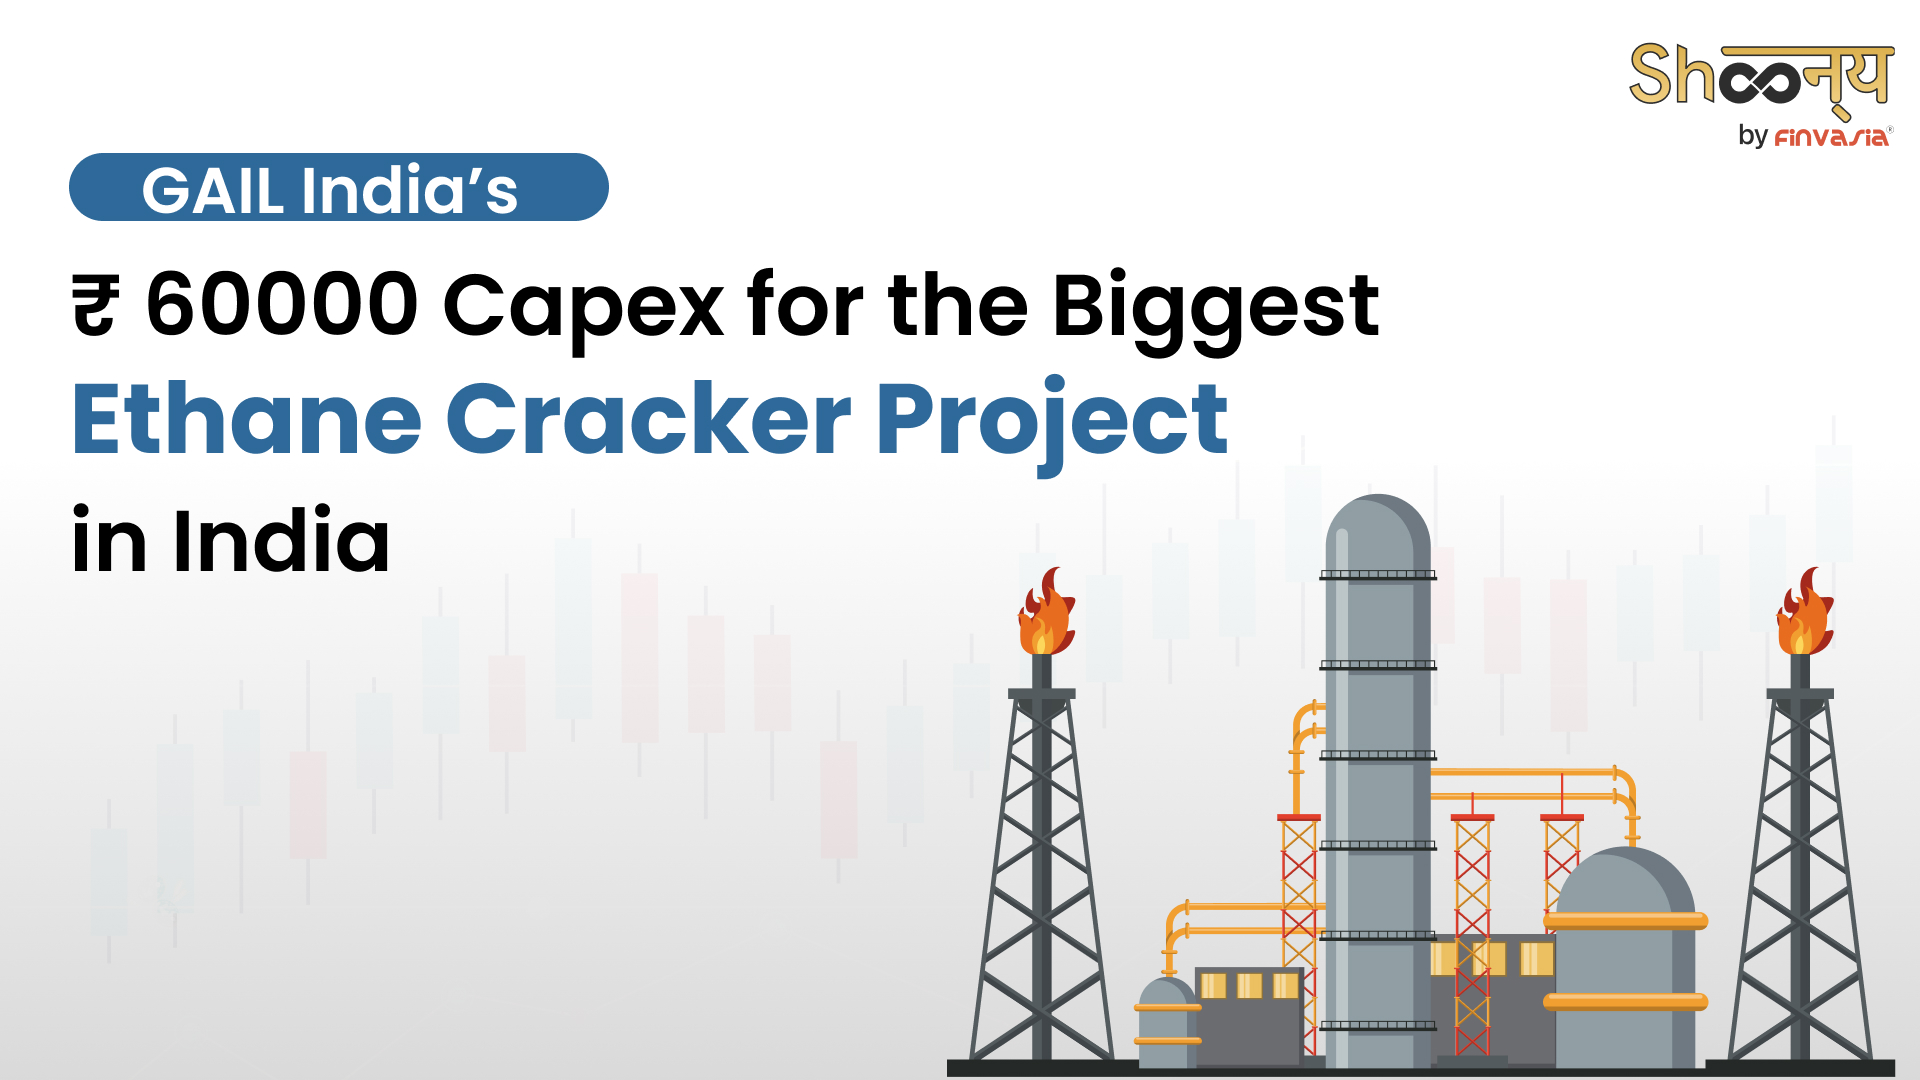 Largest Ethane Cracker Project by GAIL with ₹ 60000 crore